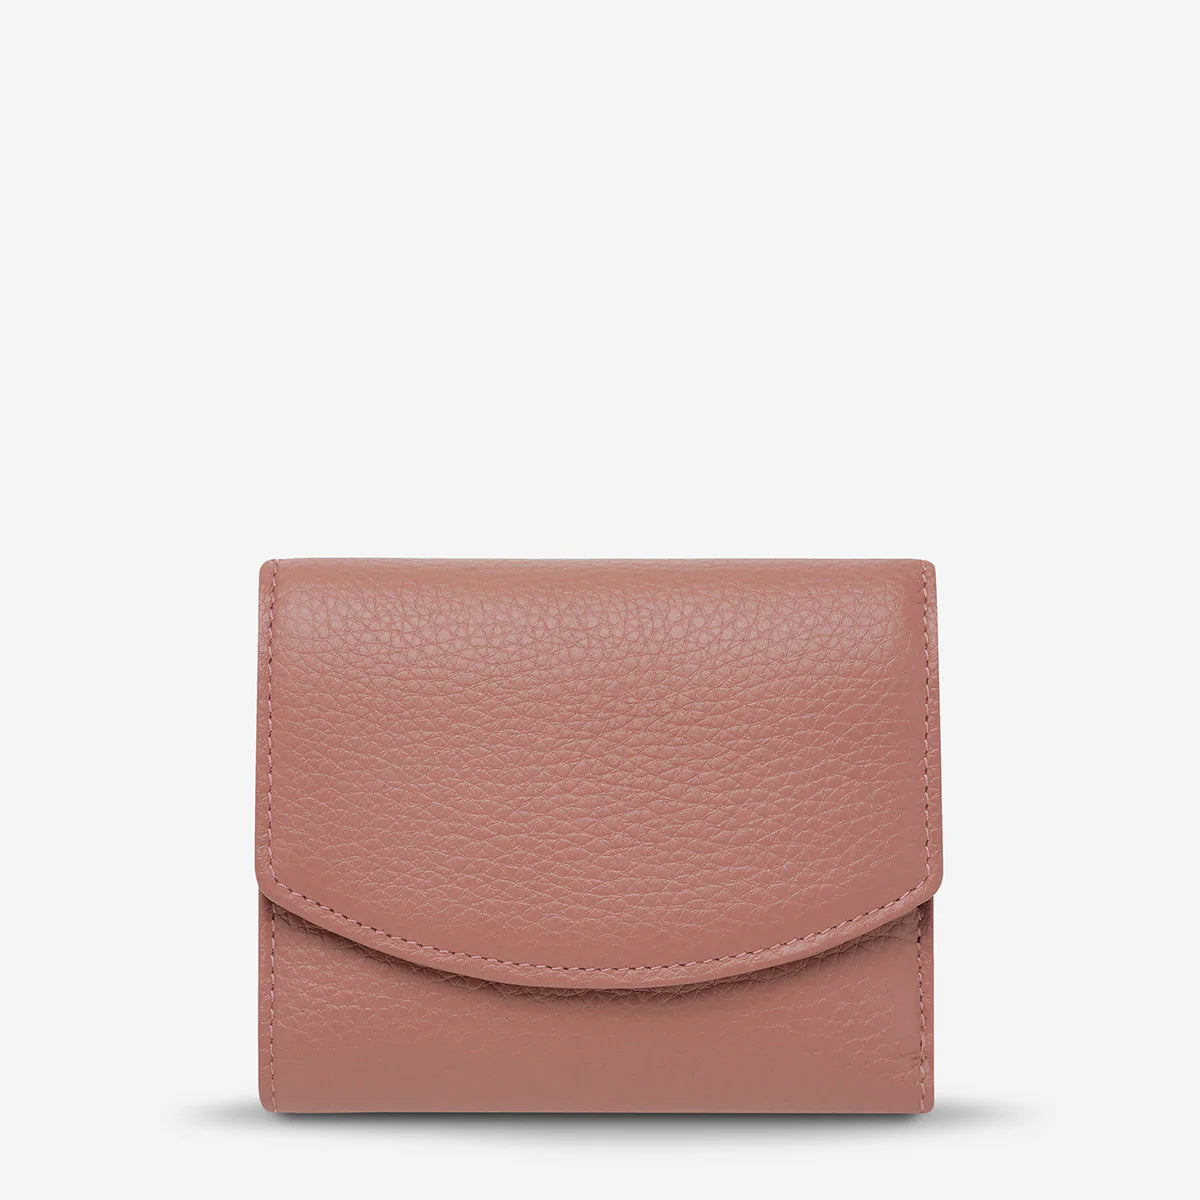 STATUS ANXIETY - Lucky Sometimes Wallet